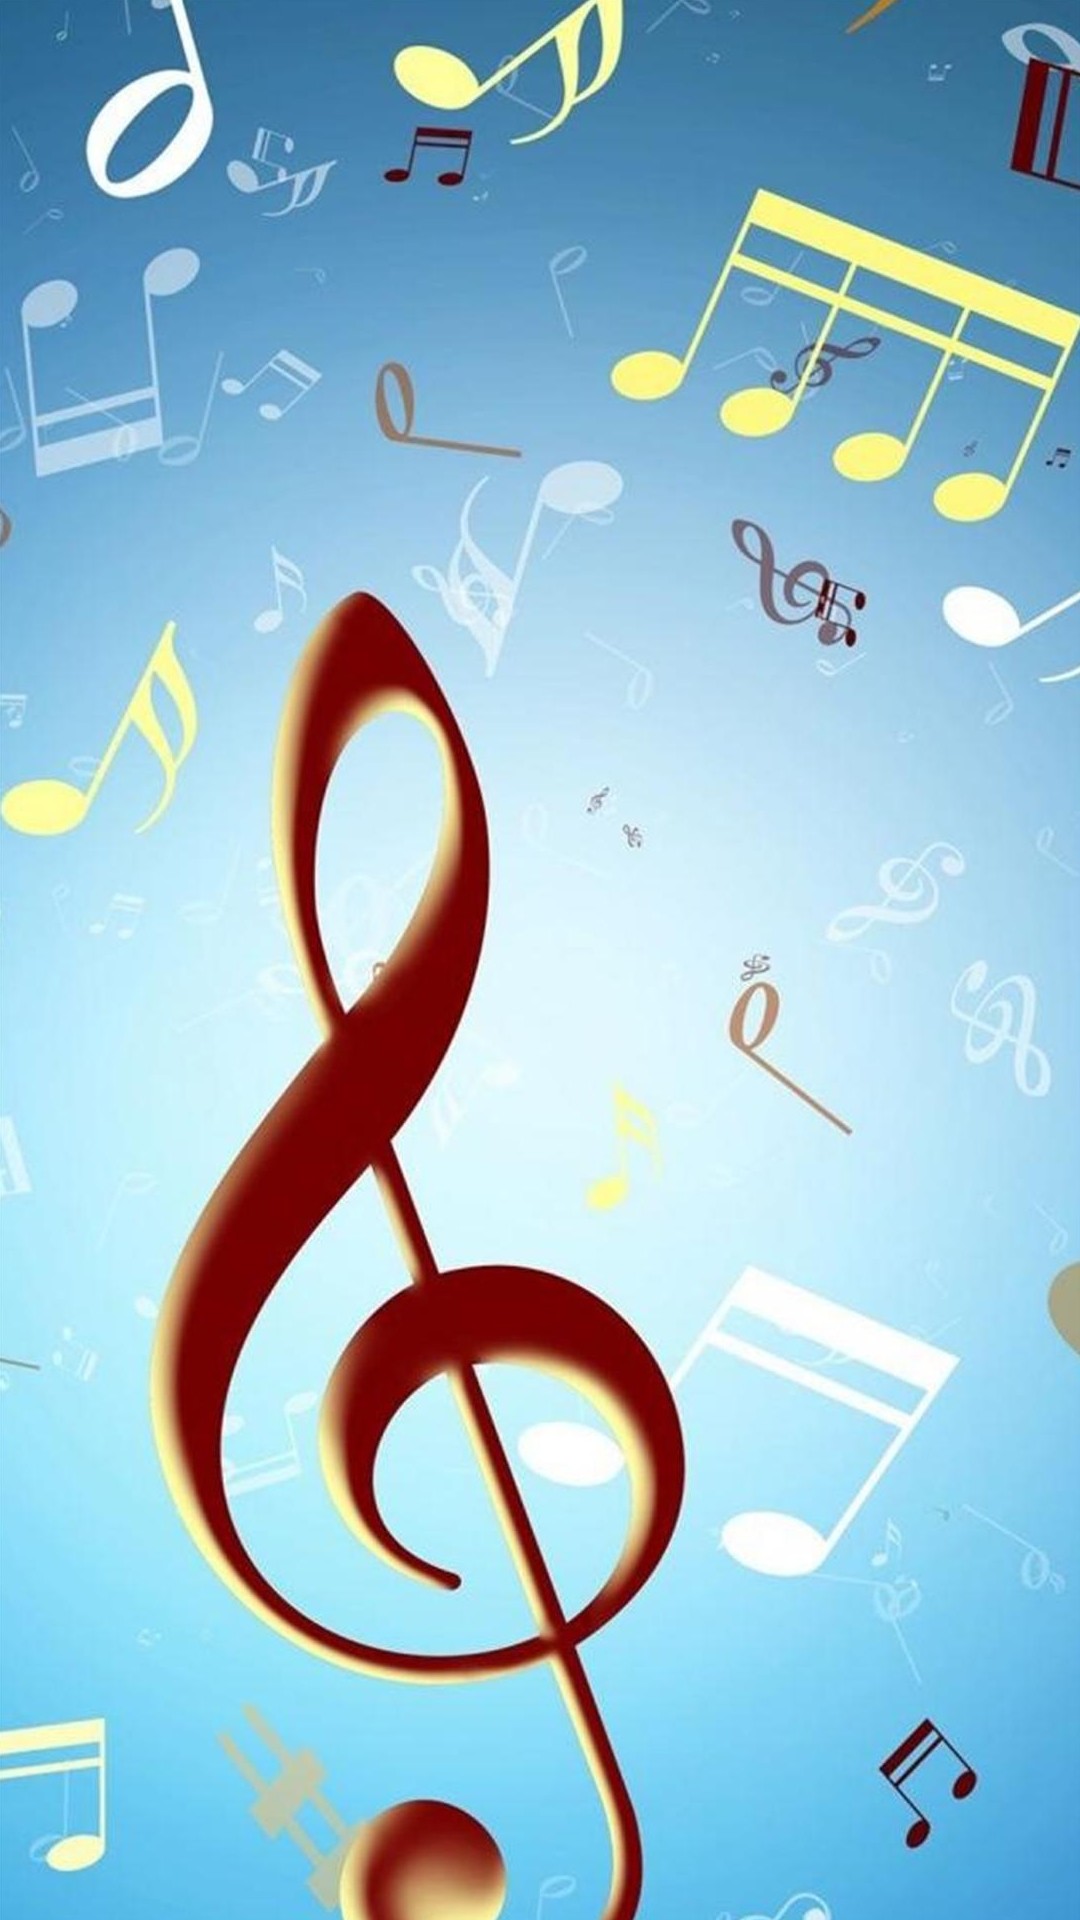 Music Galaxy S4 Wallpapers hd